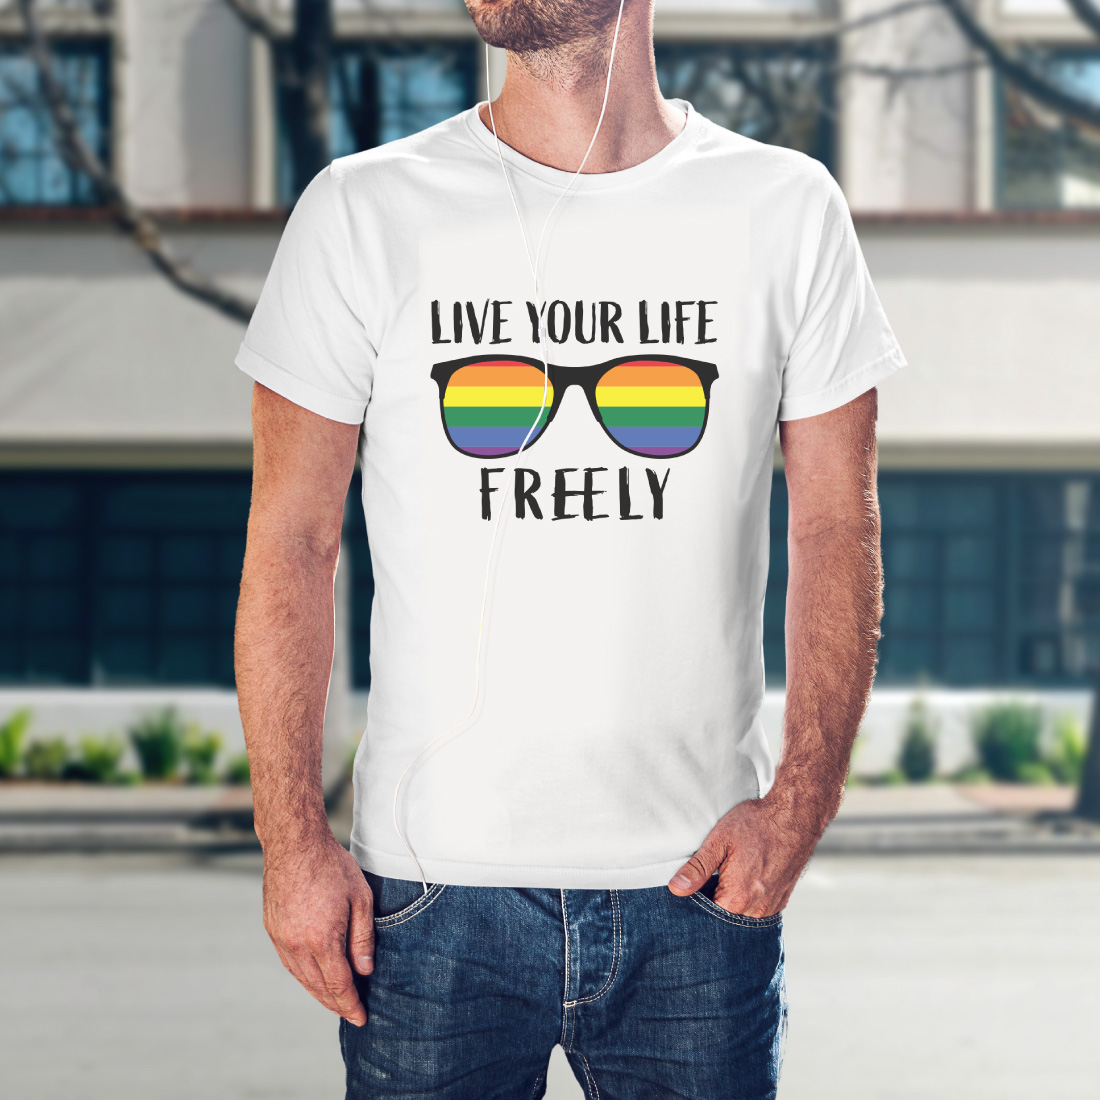 Live your life freely tshirt design preview image.